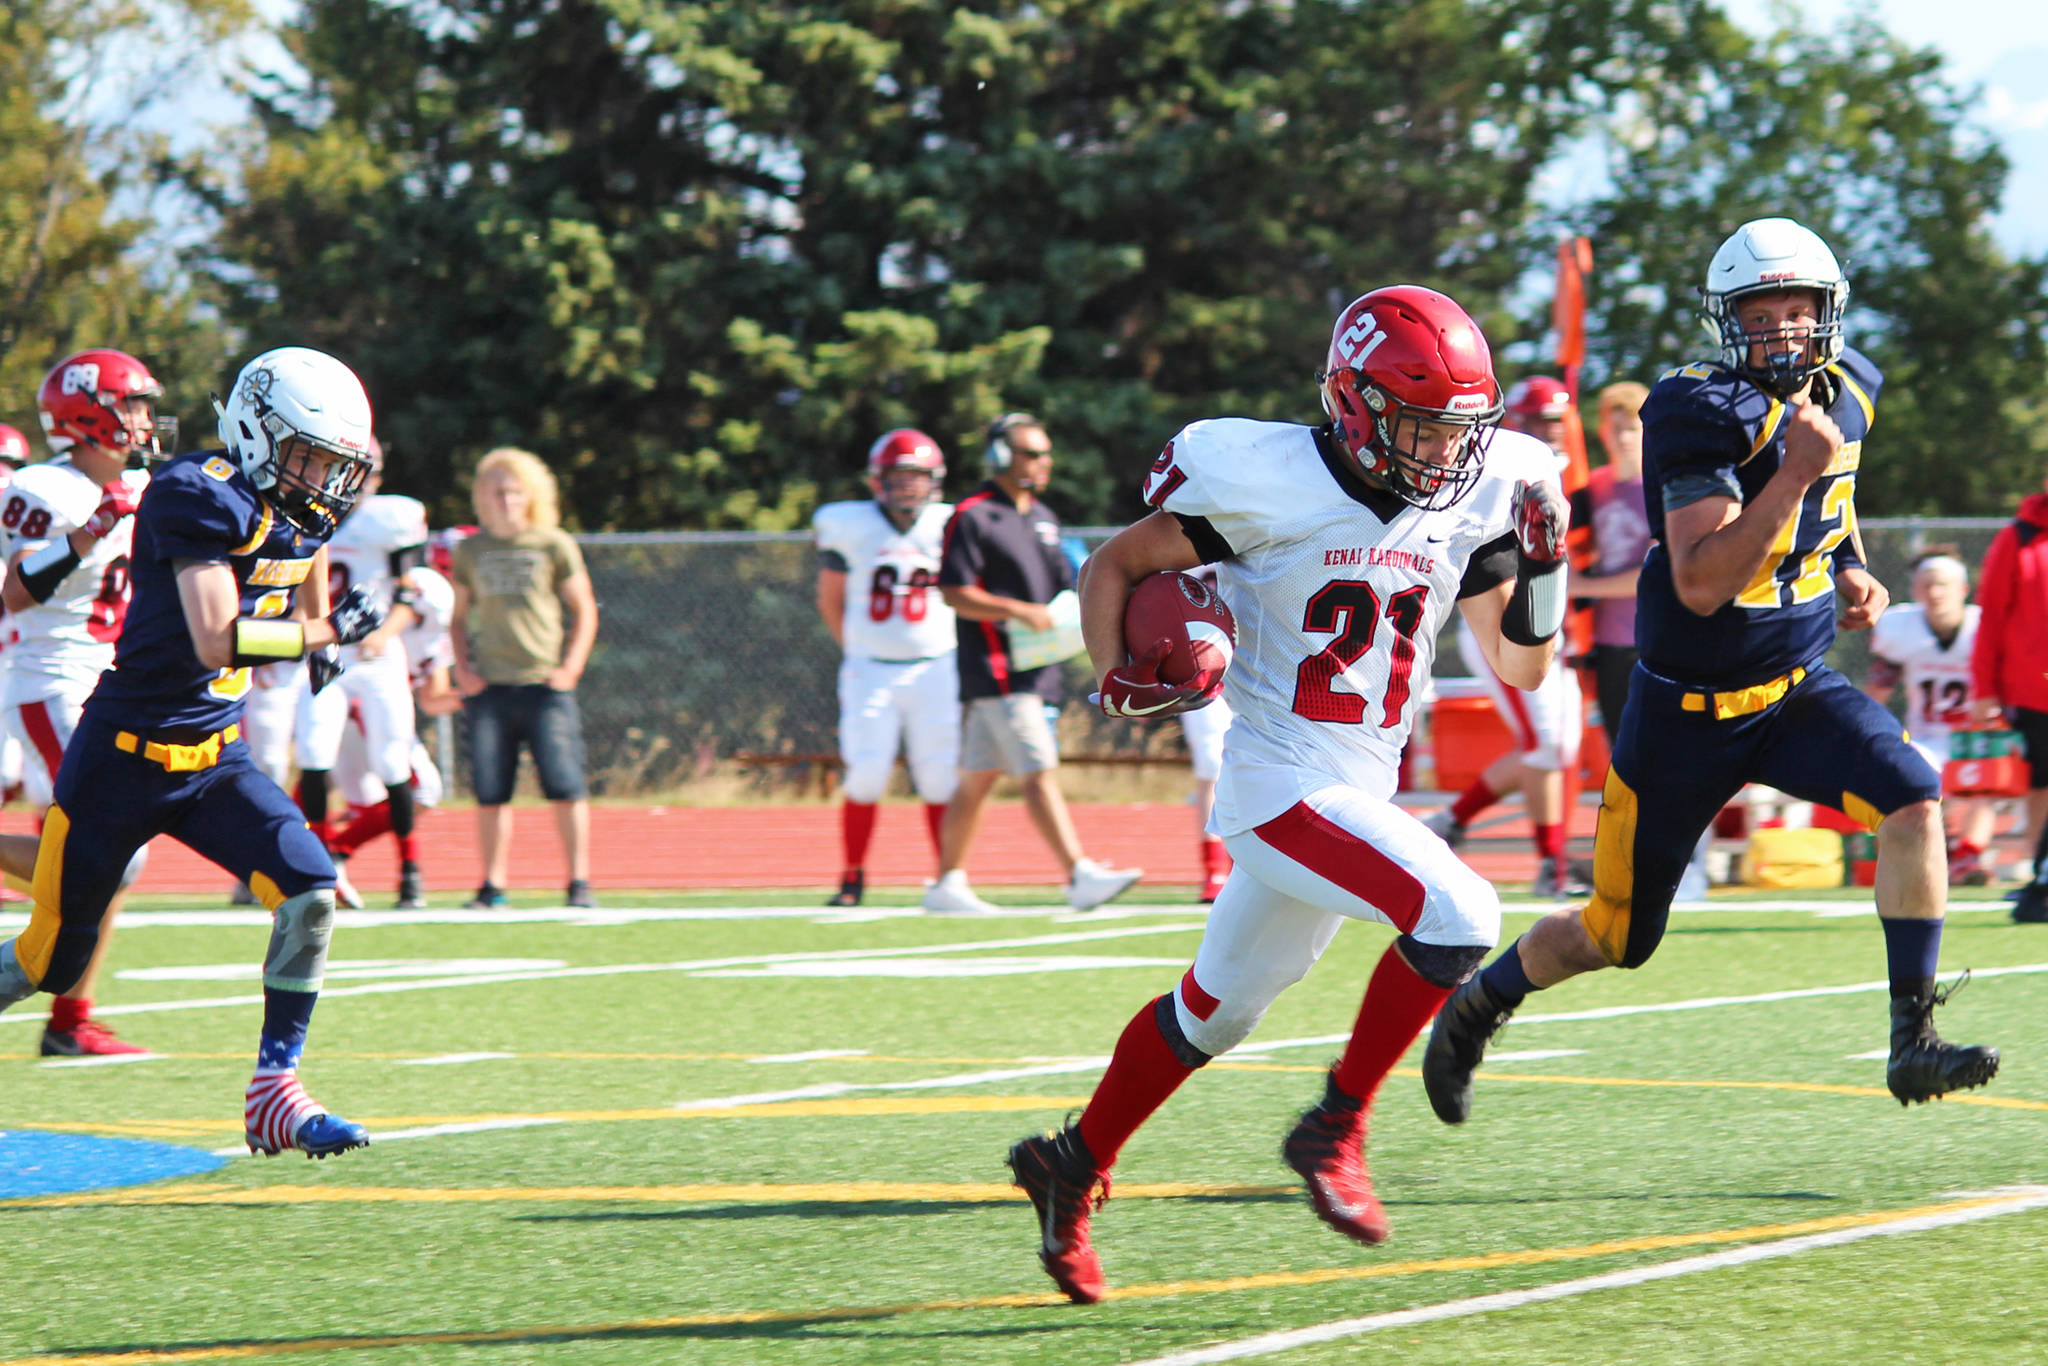 Kenai Central High School senior Zach Burnett breaks away from the Homer defense to make a 62-yard run and touchdown for the Kardinals during a Saturday, Aug. 17, 2019 football game at the Mariner field in Homer, Alaska. (Photo by Megan Pacer/Homer News)